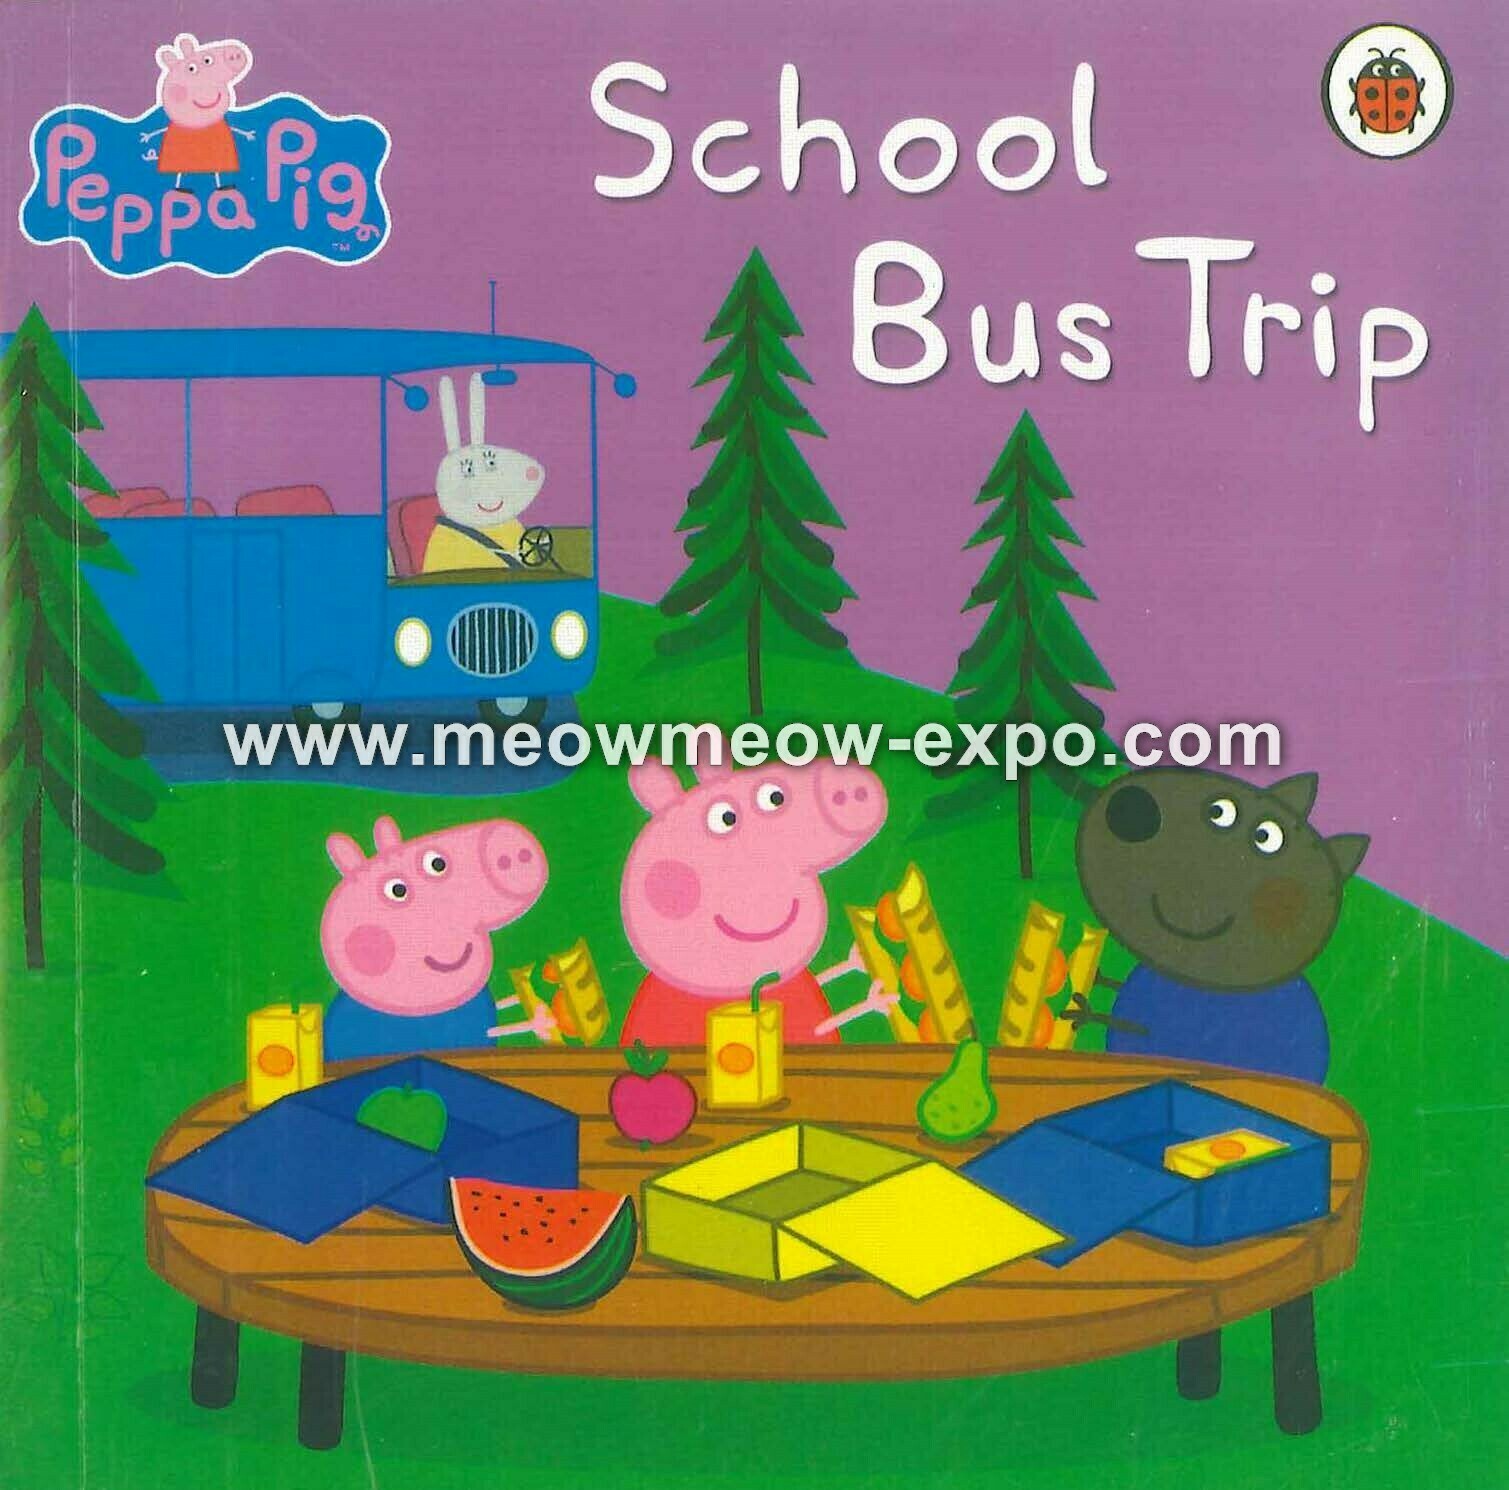 FP44 The Peppa Pig Ultimate Collection - School Bus Trip 9780241377987